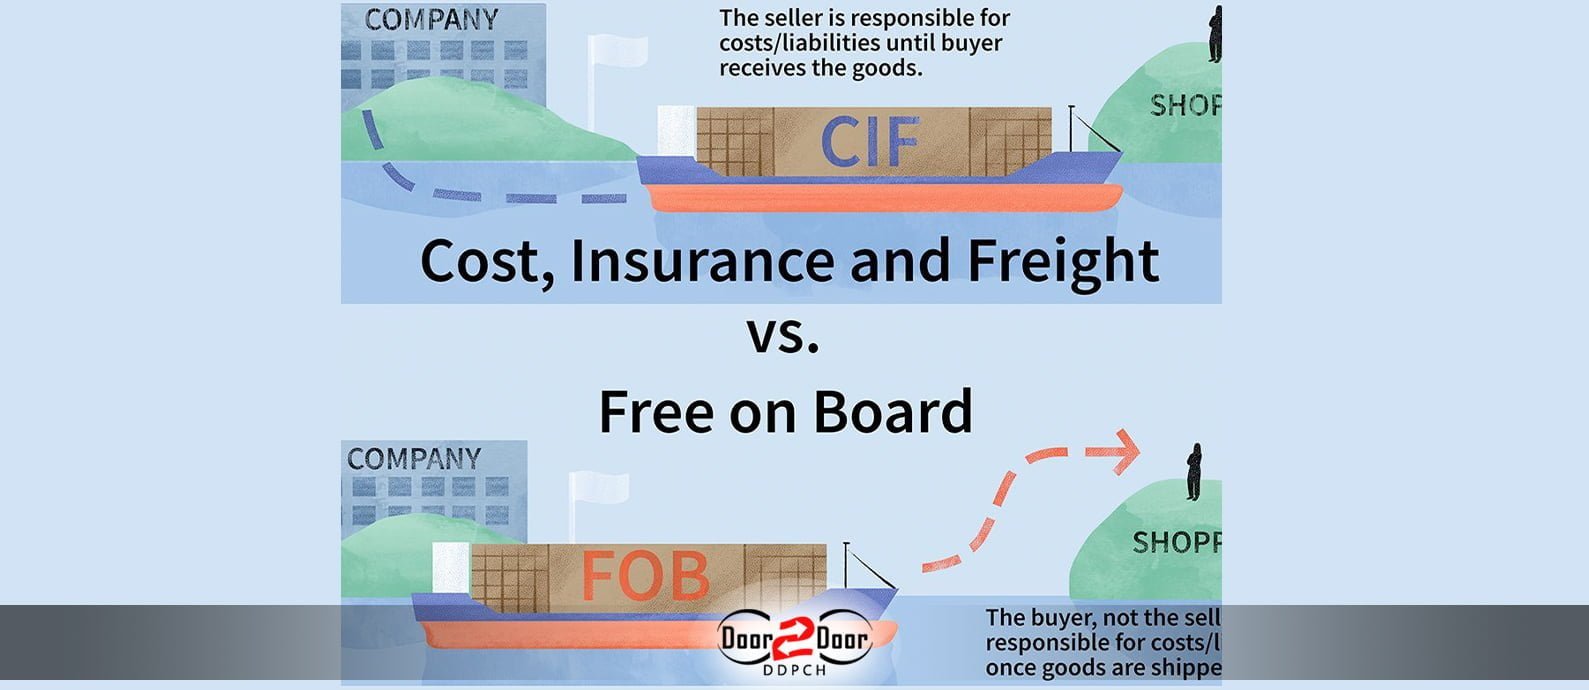 Incoterms define the duties of sellers and buyers.